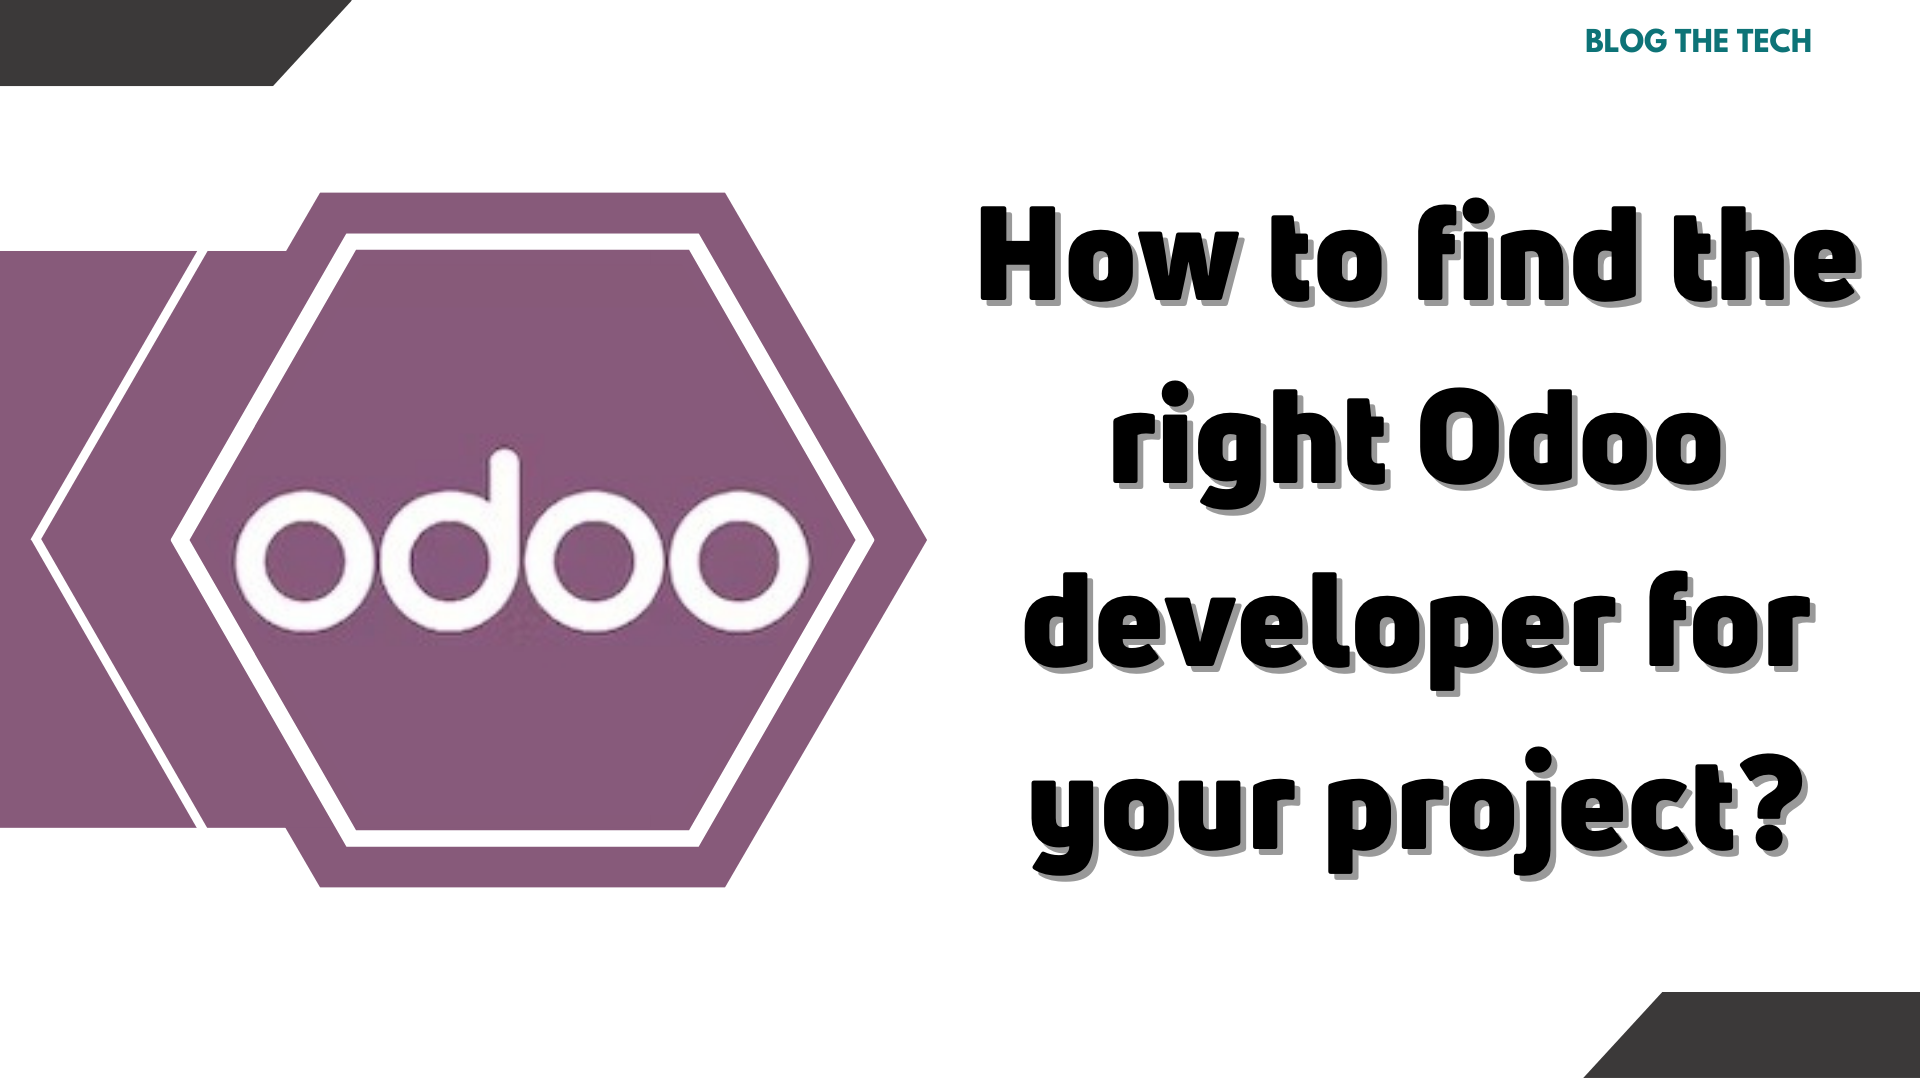 How to find the right Odoo developer for your project?